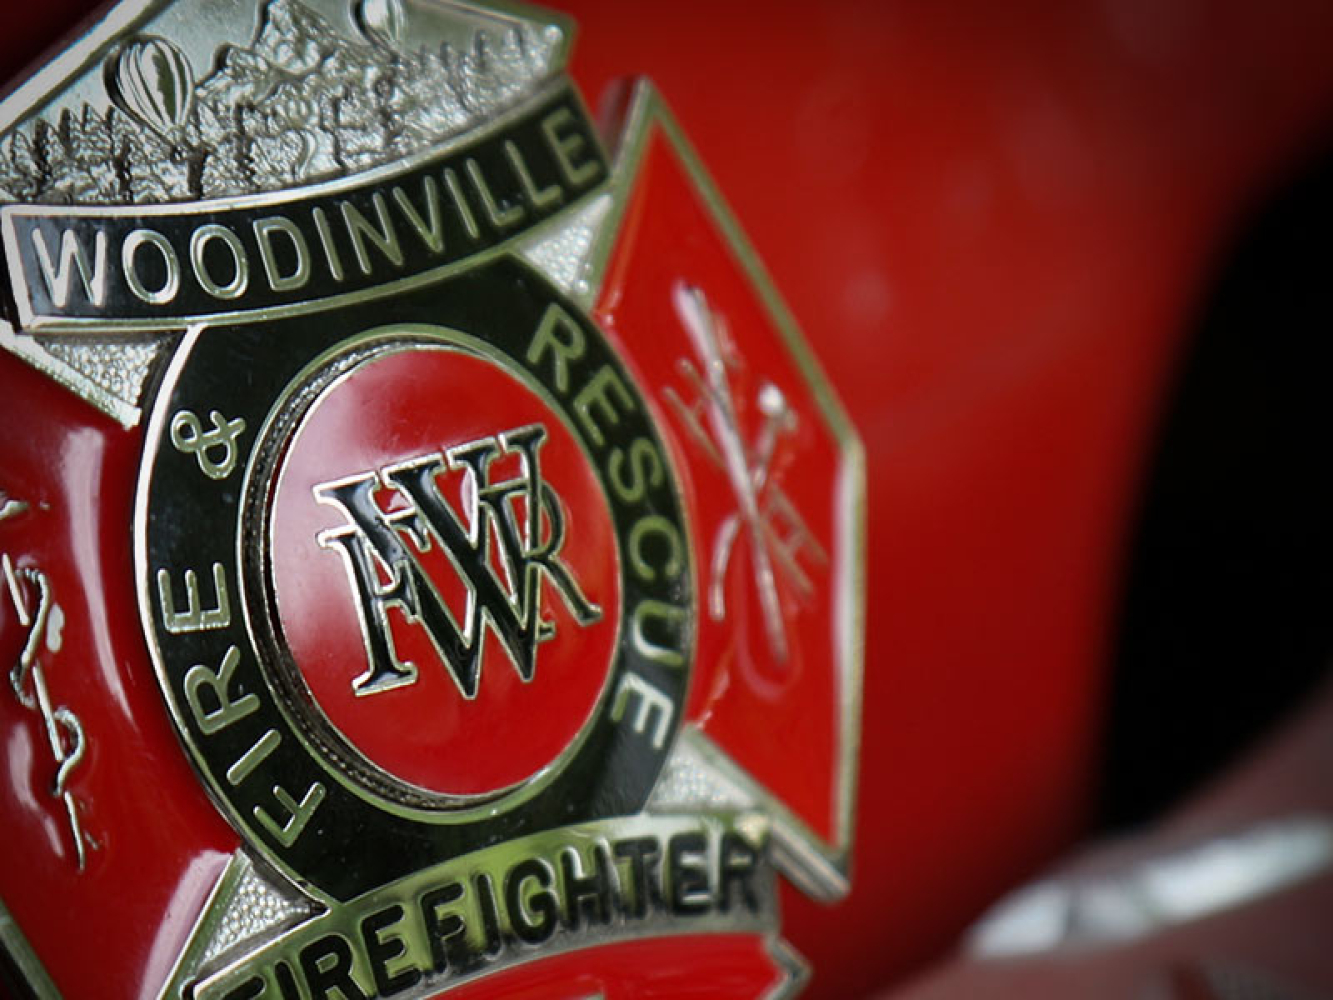 Woodinville Fire and Rescue Custom Badge